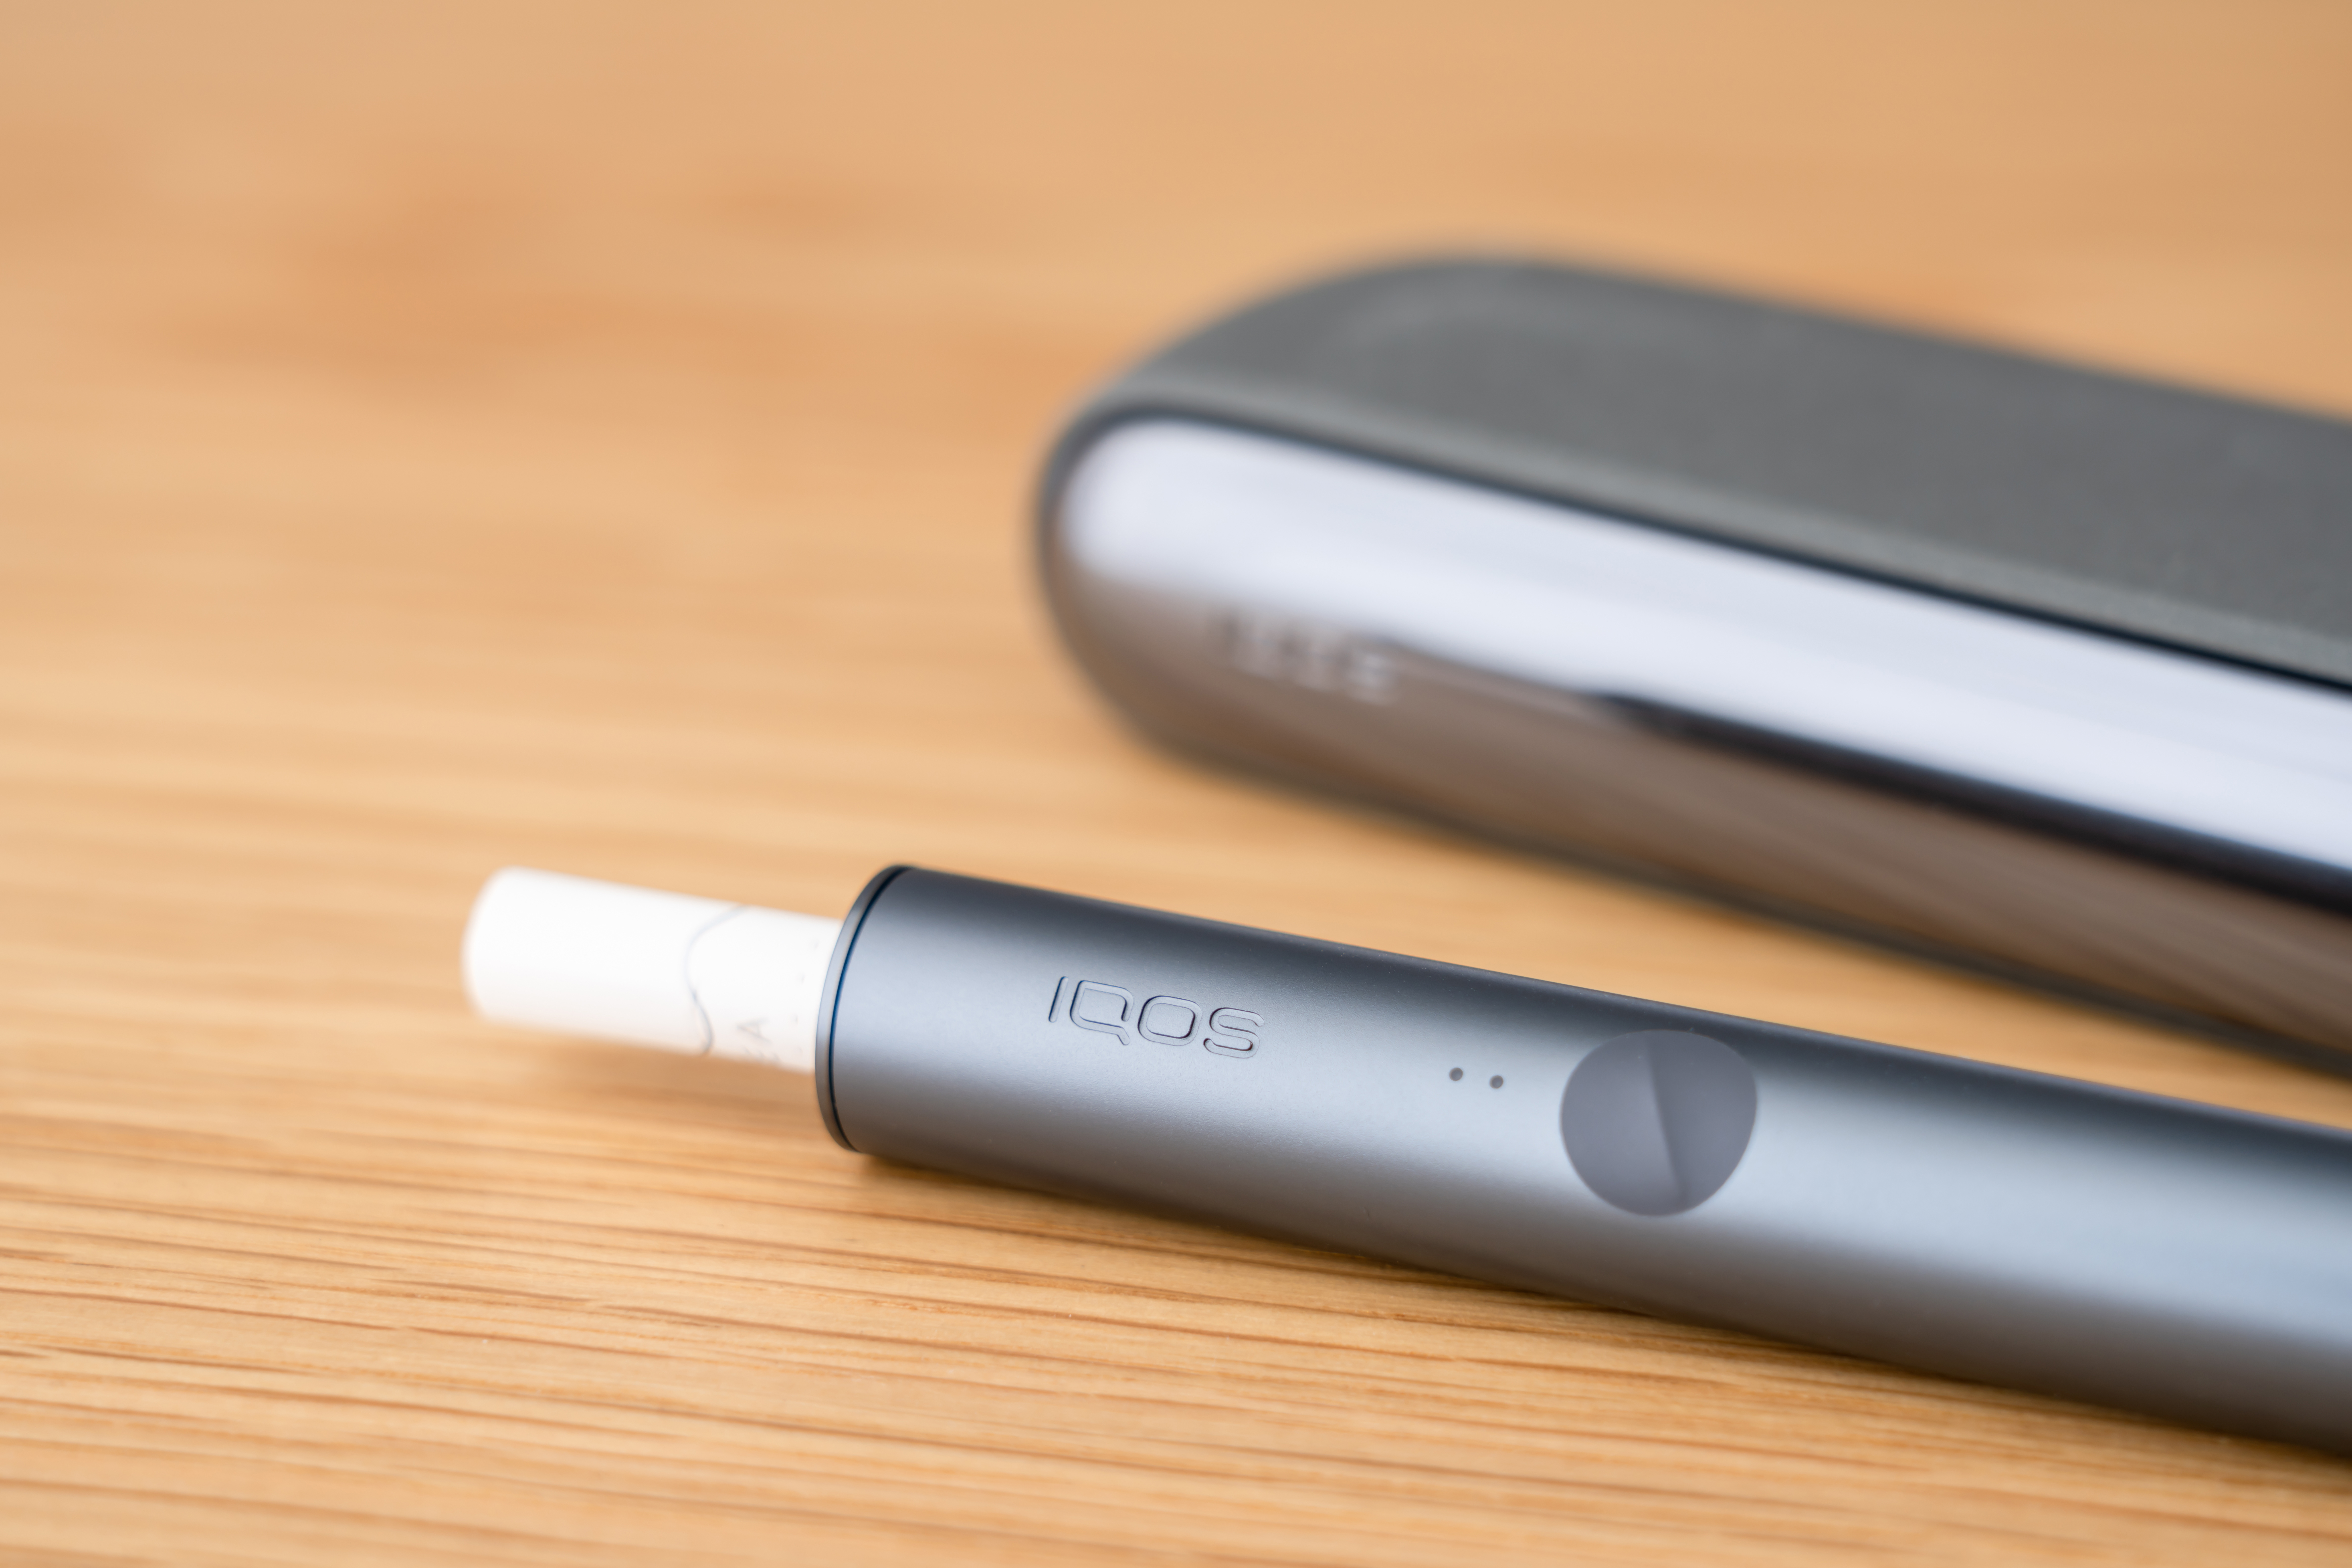  Altria Reaches Deal With PMI for IQOS Transition